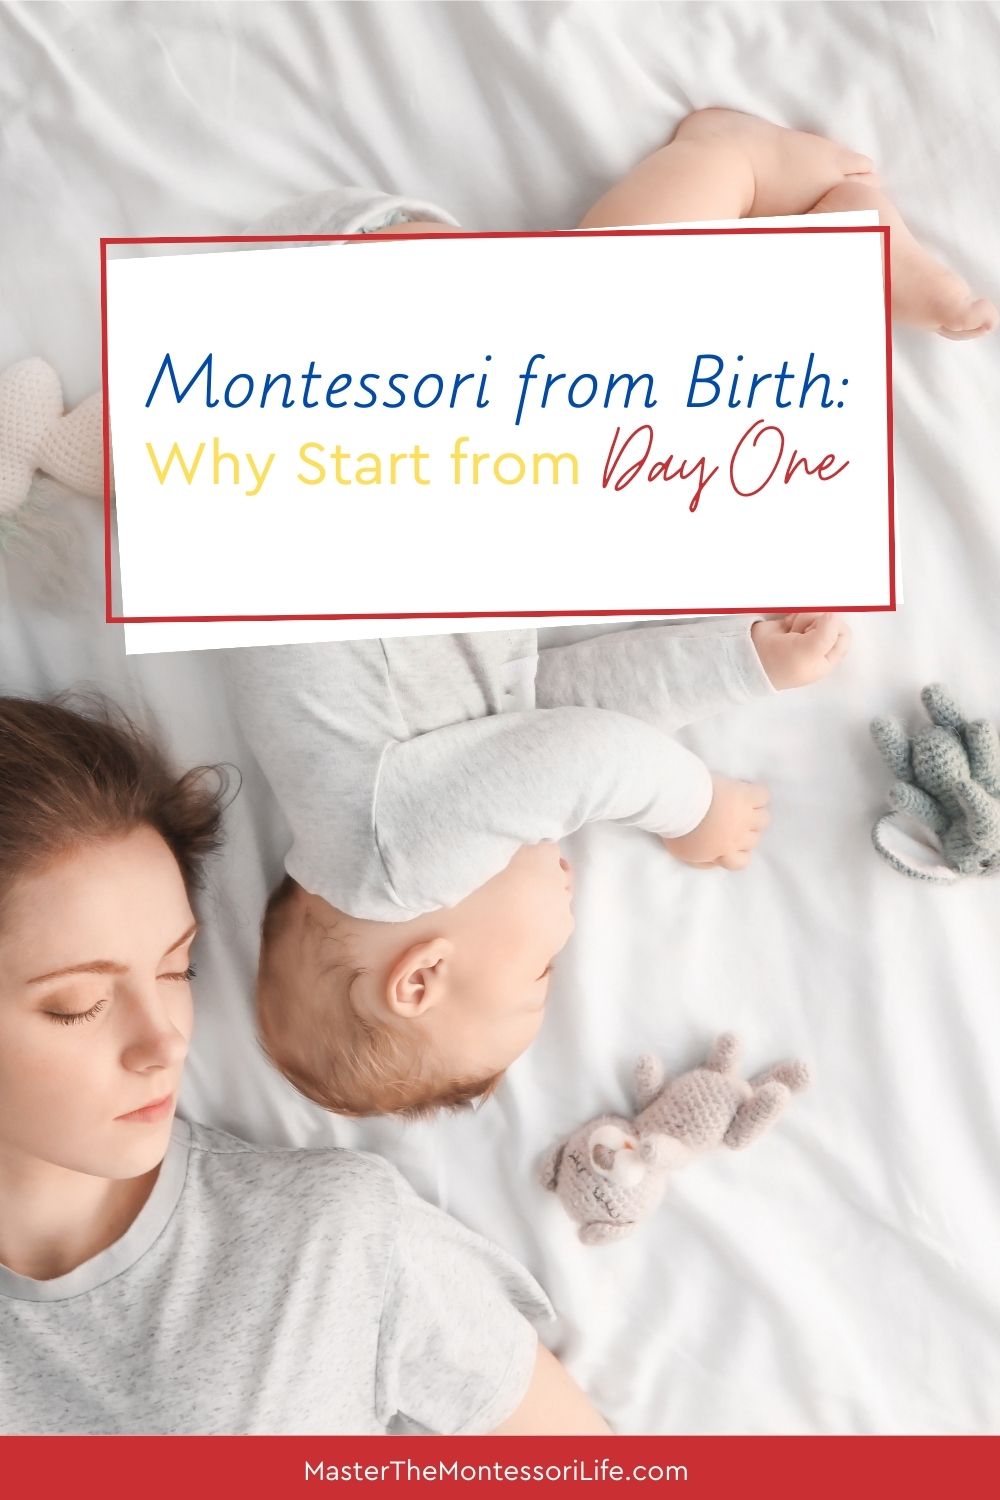 Montessori from Birth: Why Start from Day One